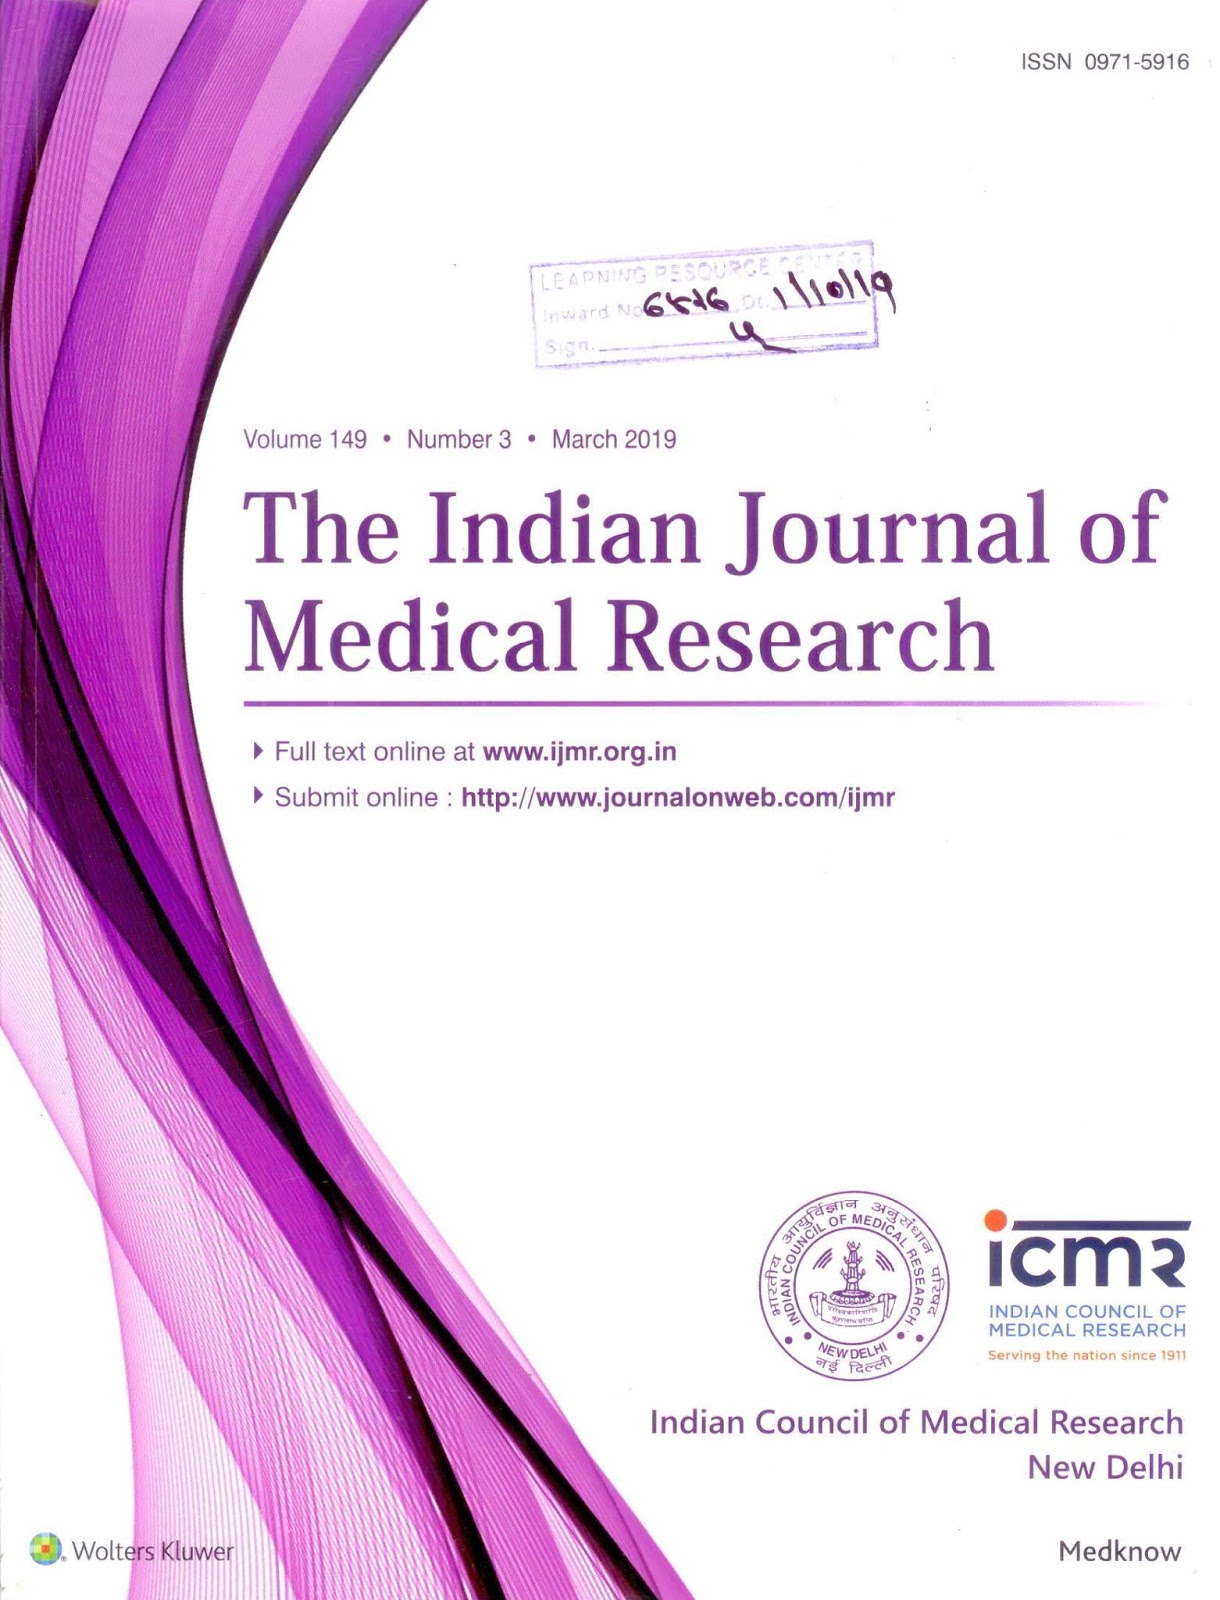 http://www.ijmr.org.in/showBackIssue.asp?issn=0971-5916;year=2019;volume=149;issue=3;month=March